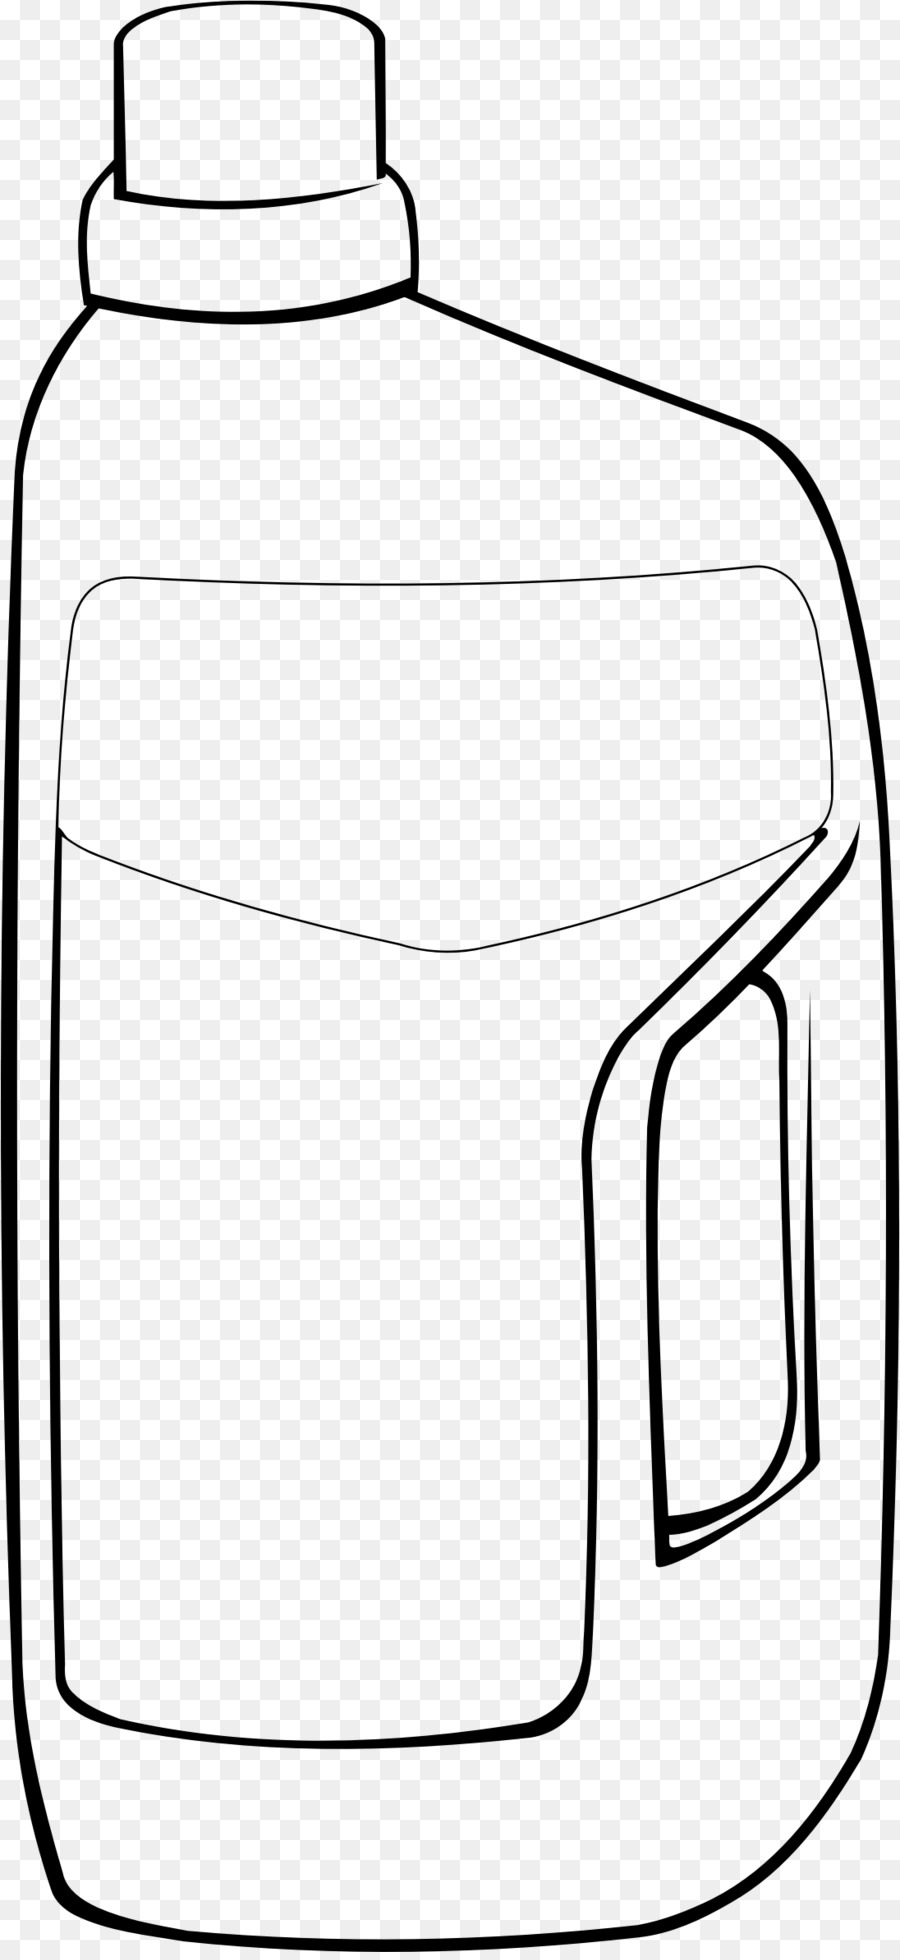 Container Kunststoff-Flasche Clip-art - Container